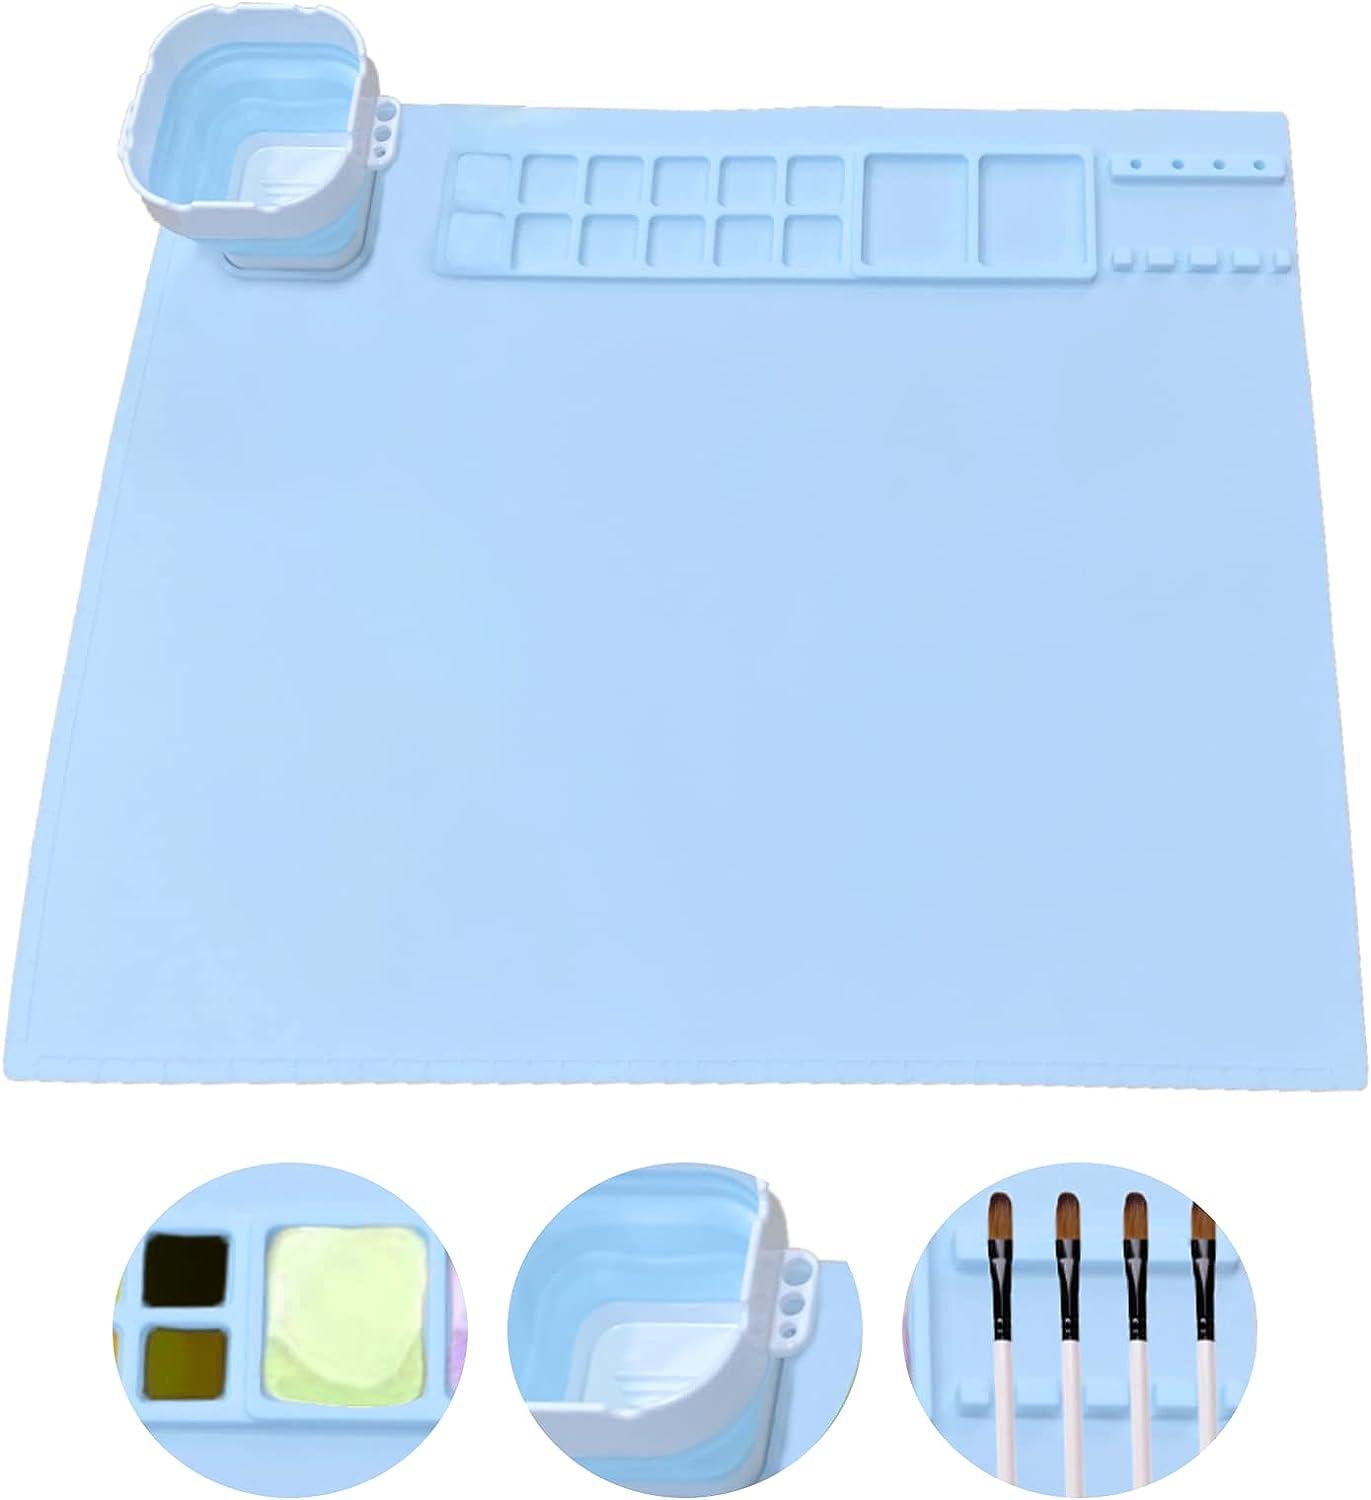 Silicone Craft Mat,painting Mat With Cup, Non Stick Silicone Sheet